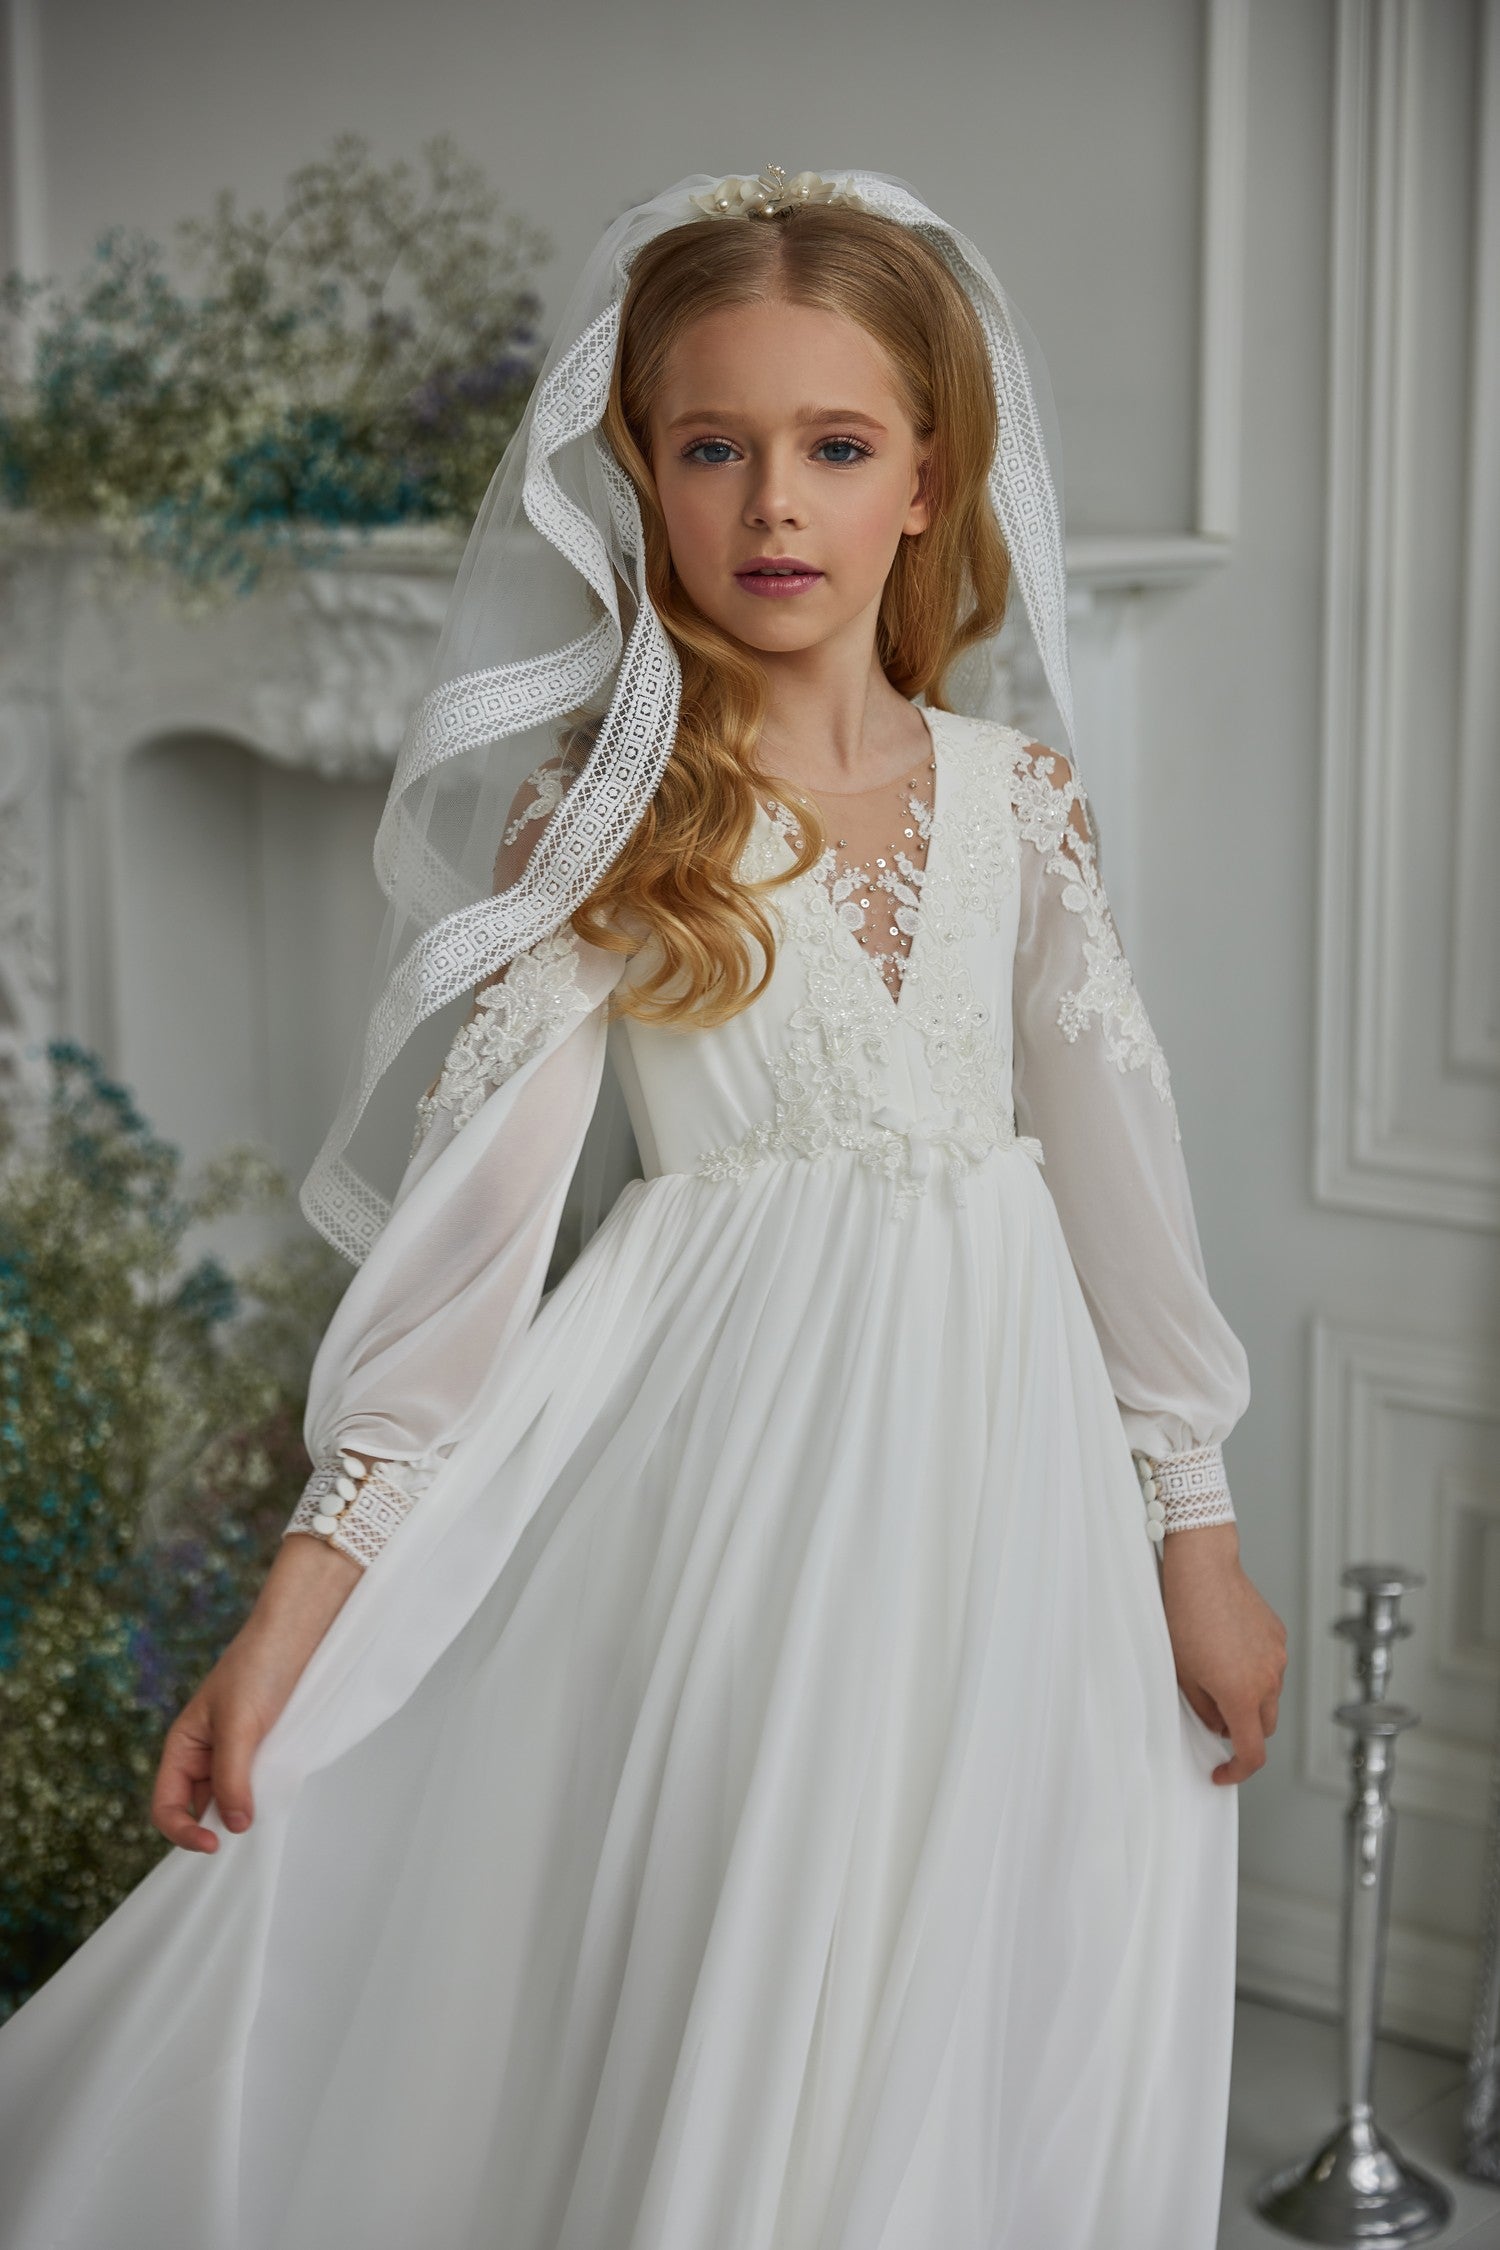 Pentelei Two Tier Veil First Communion Flower Girl Accessories Style Celestial A45 in Stock Ivory